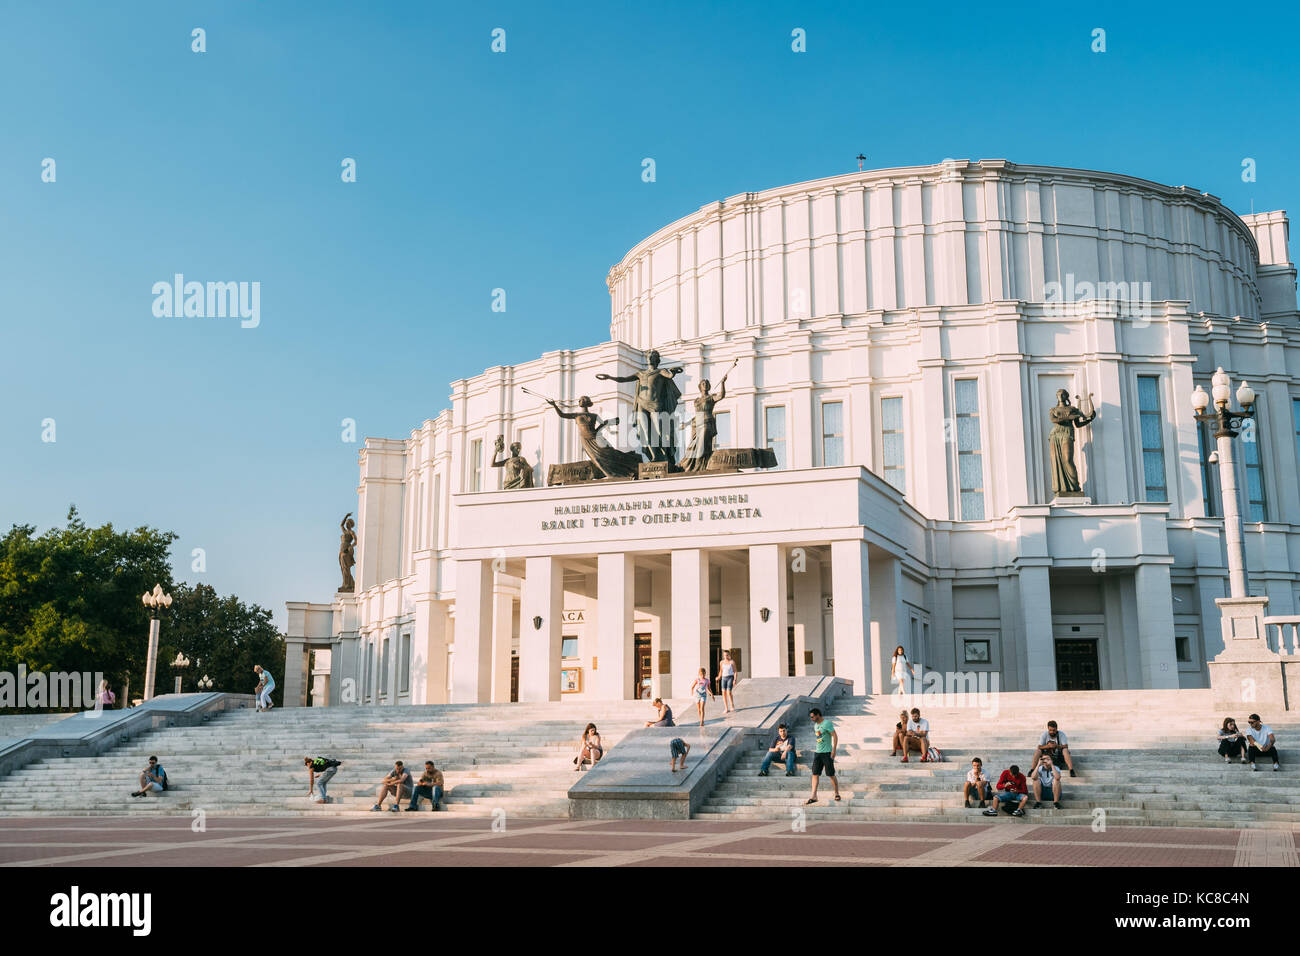 Minsk Belarus. Main Facade Of National Academic Grand Opera Ballet Theatre, White Building Of Constructivist Style Decorated By Sculptures. Resting Yo Stock Photo